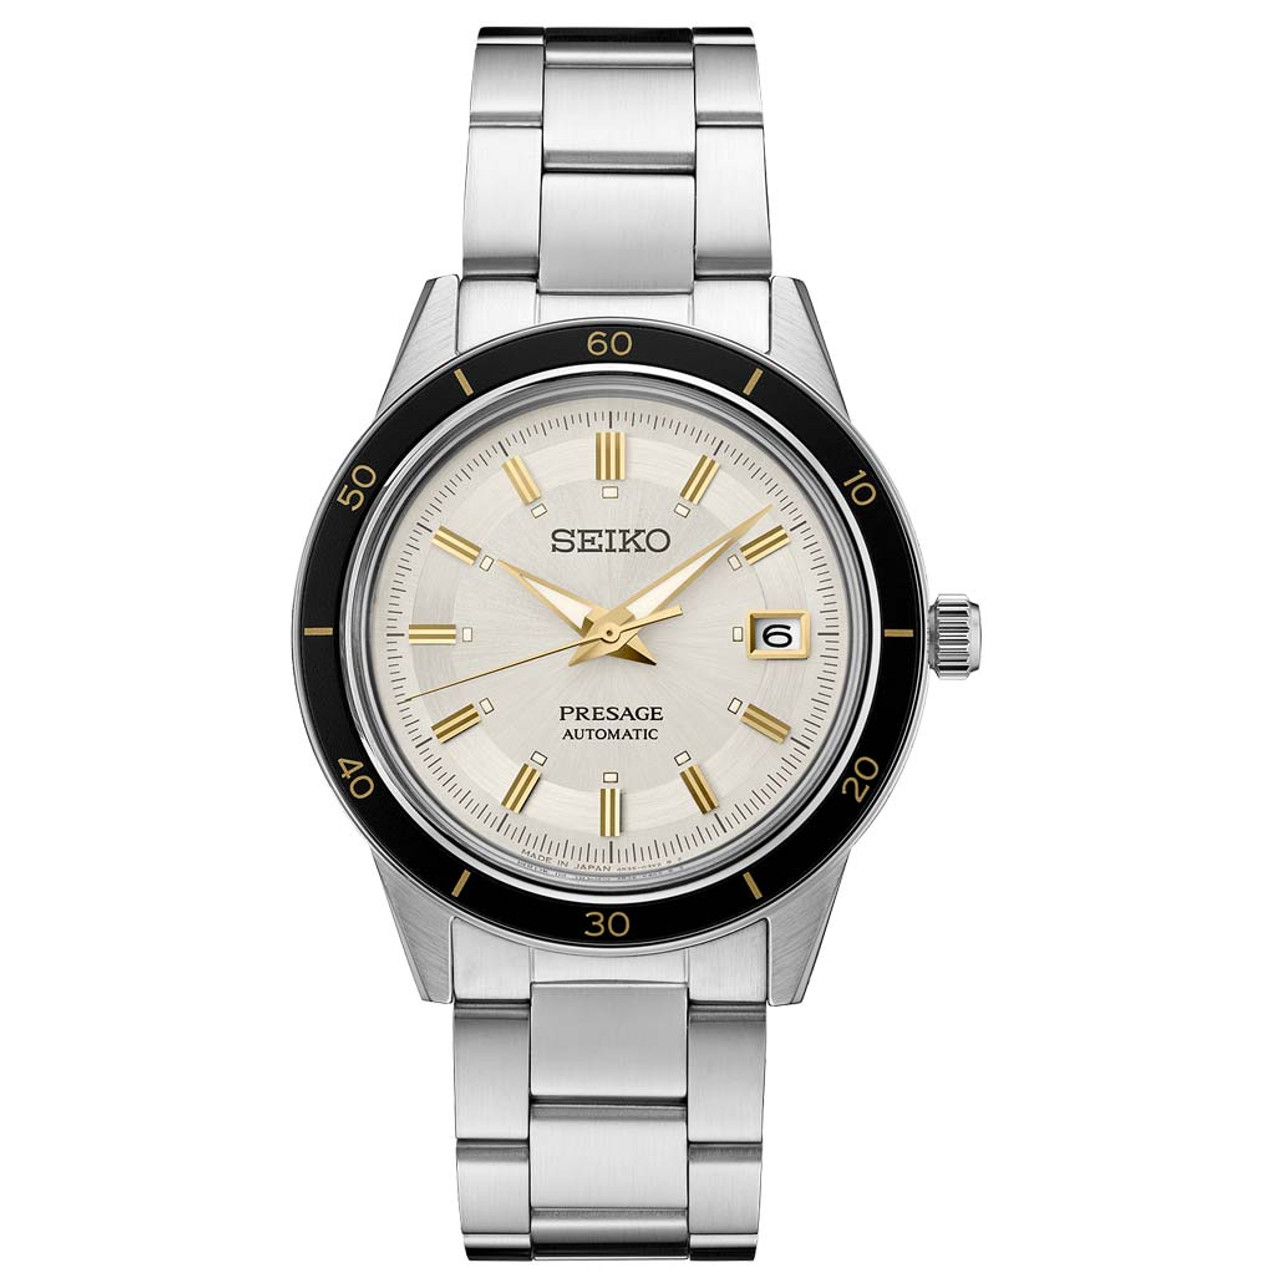 Seiko Presage Automatic Sporty Dress Watch with 41mm Case, and Hardlex Box  Crystal #SRPG03